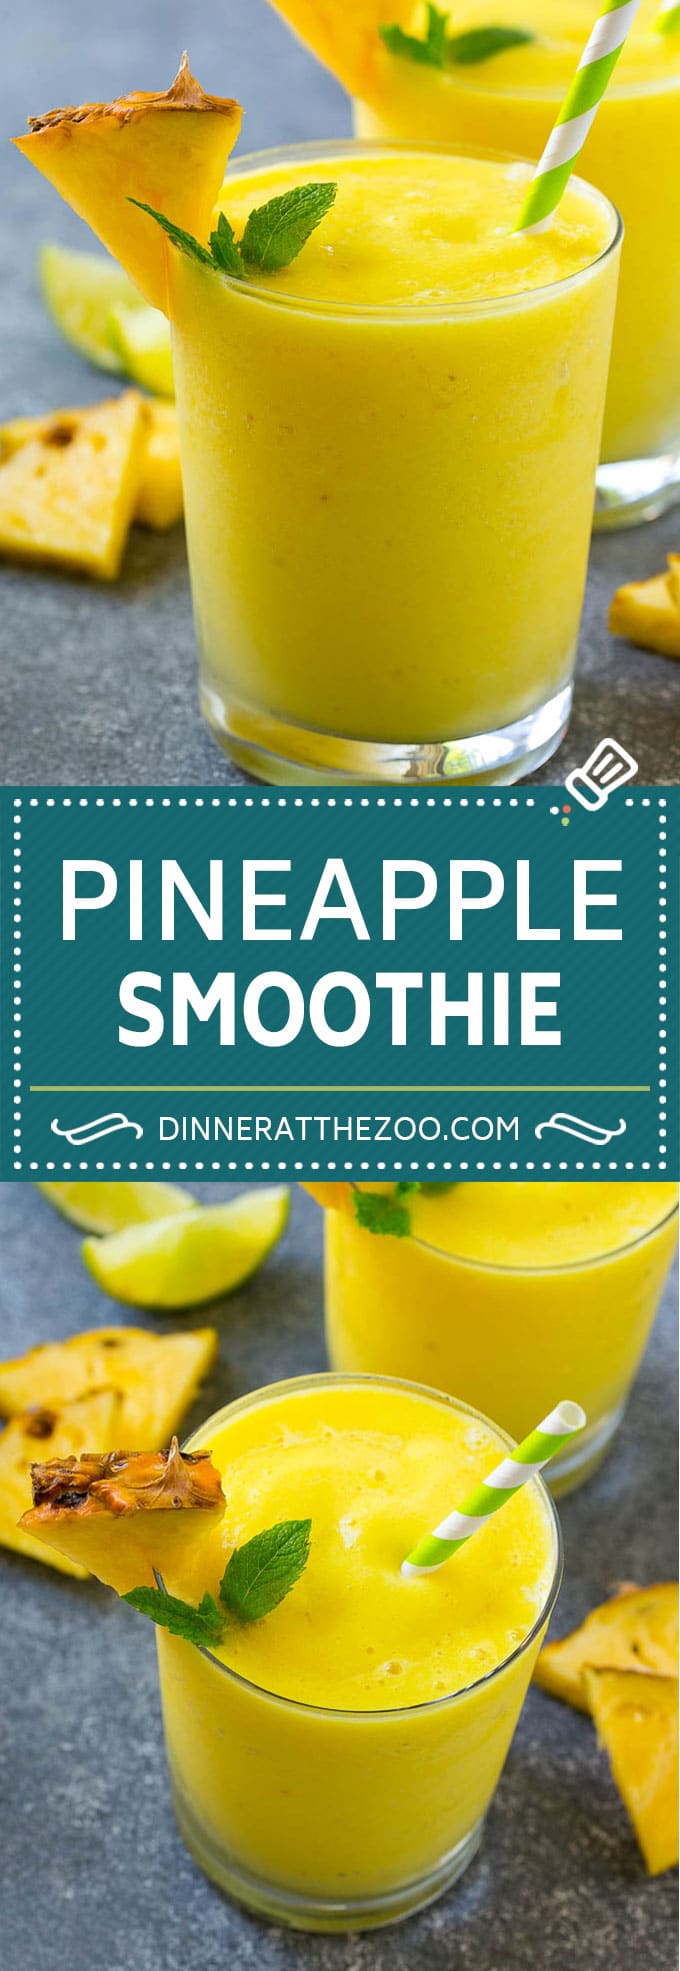 Pineapple Smoothie Recipe | Healthy Smoothie Recipe | Pineapple Recipe #pineapple #smoothie #drink #dinneratthezoo